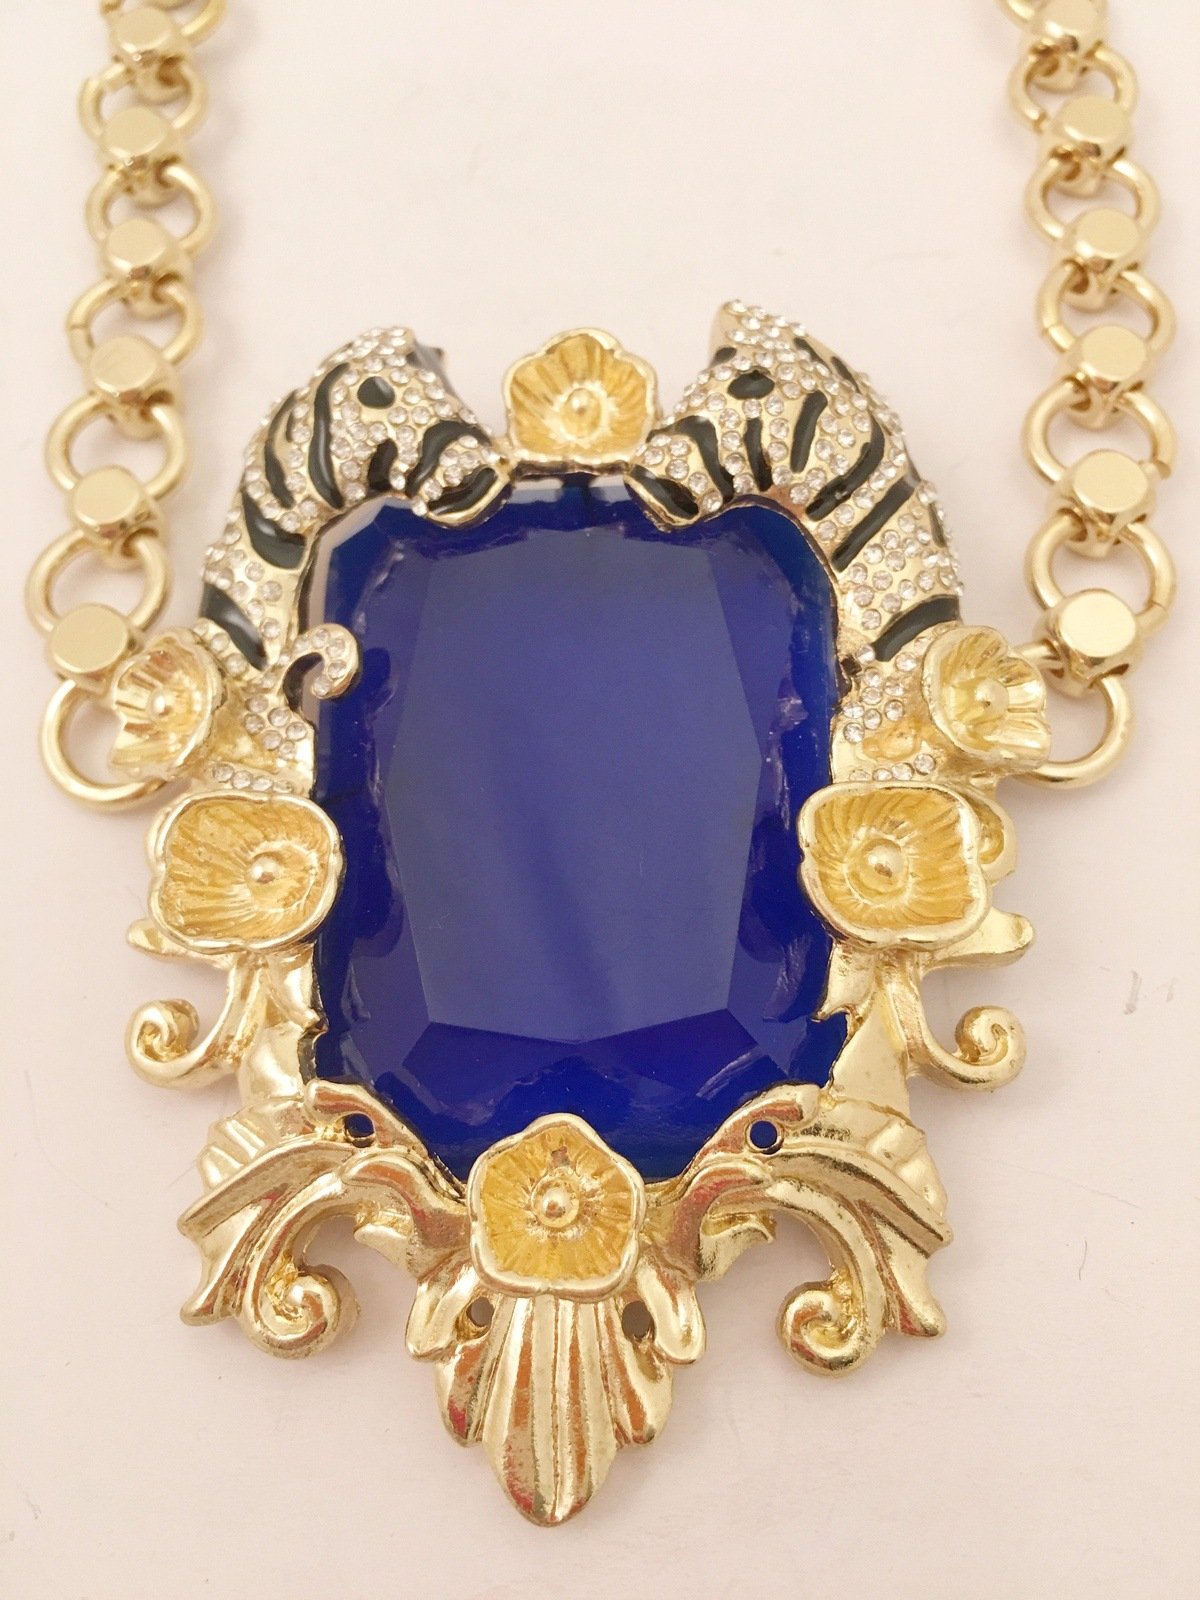 Massive Blue Pendant with Zebras Golden Chain Necklace Jewelry